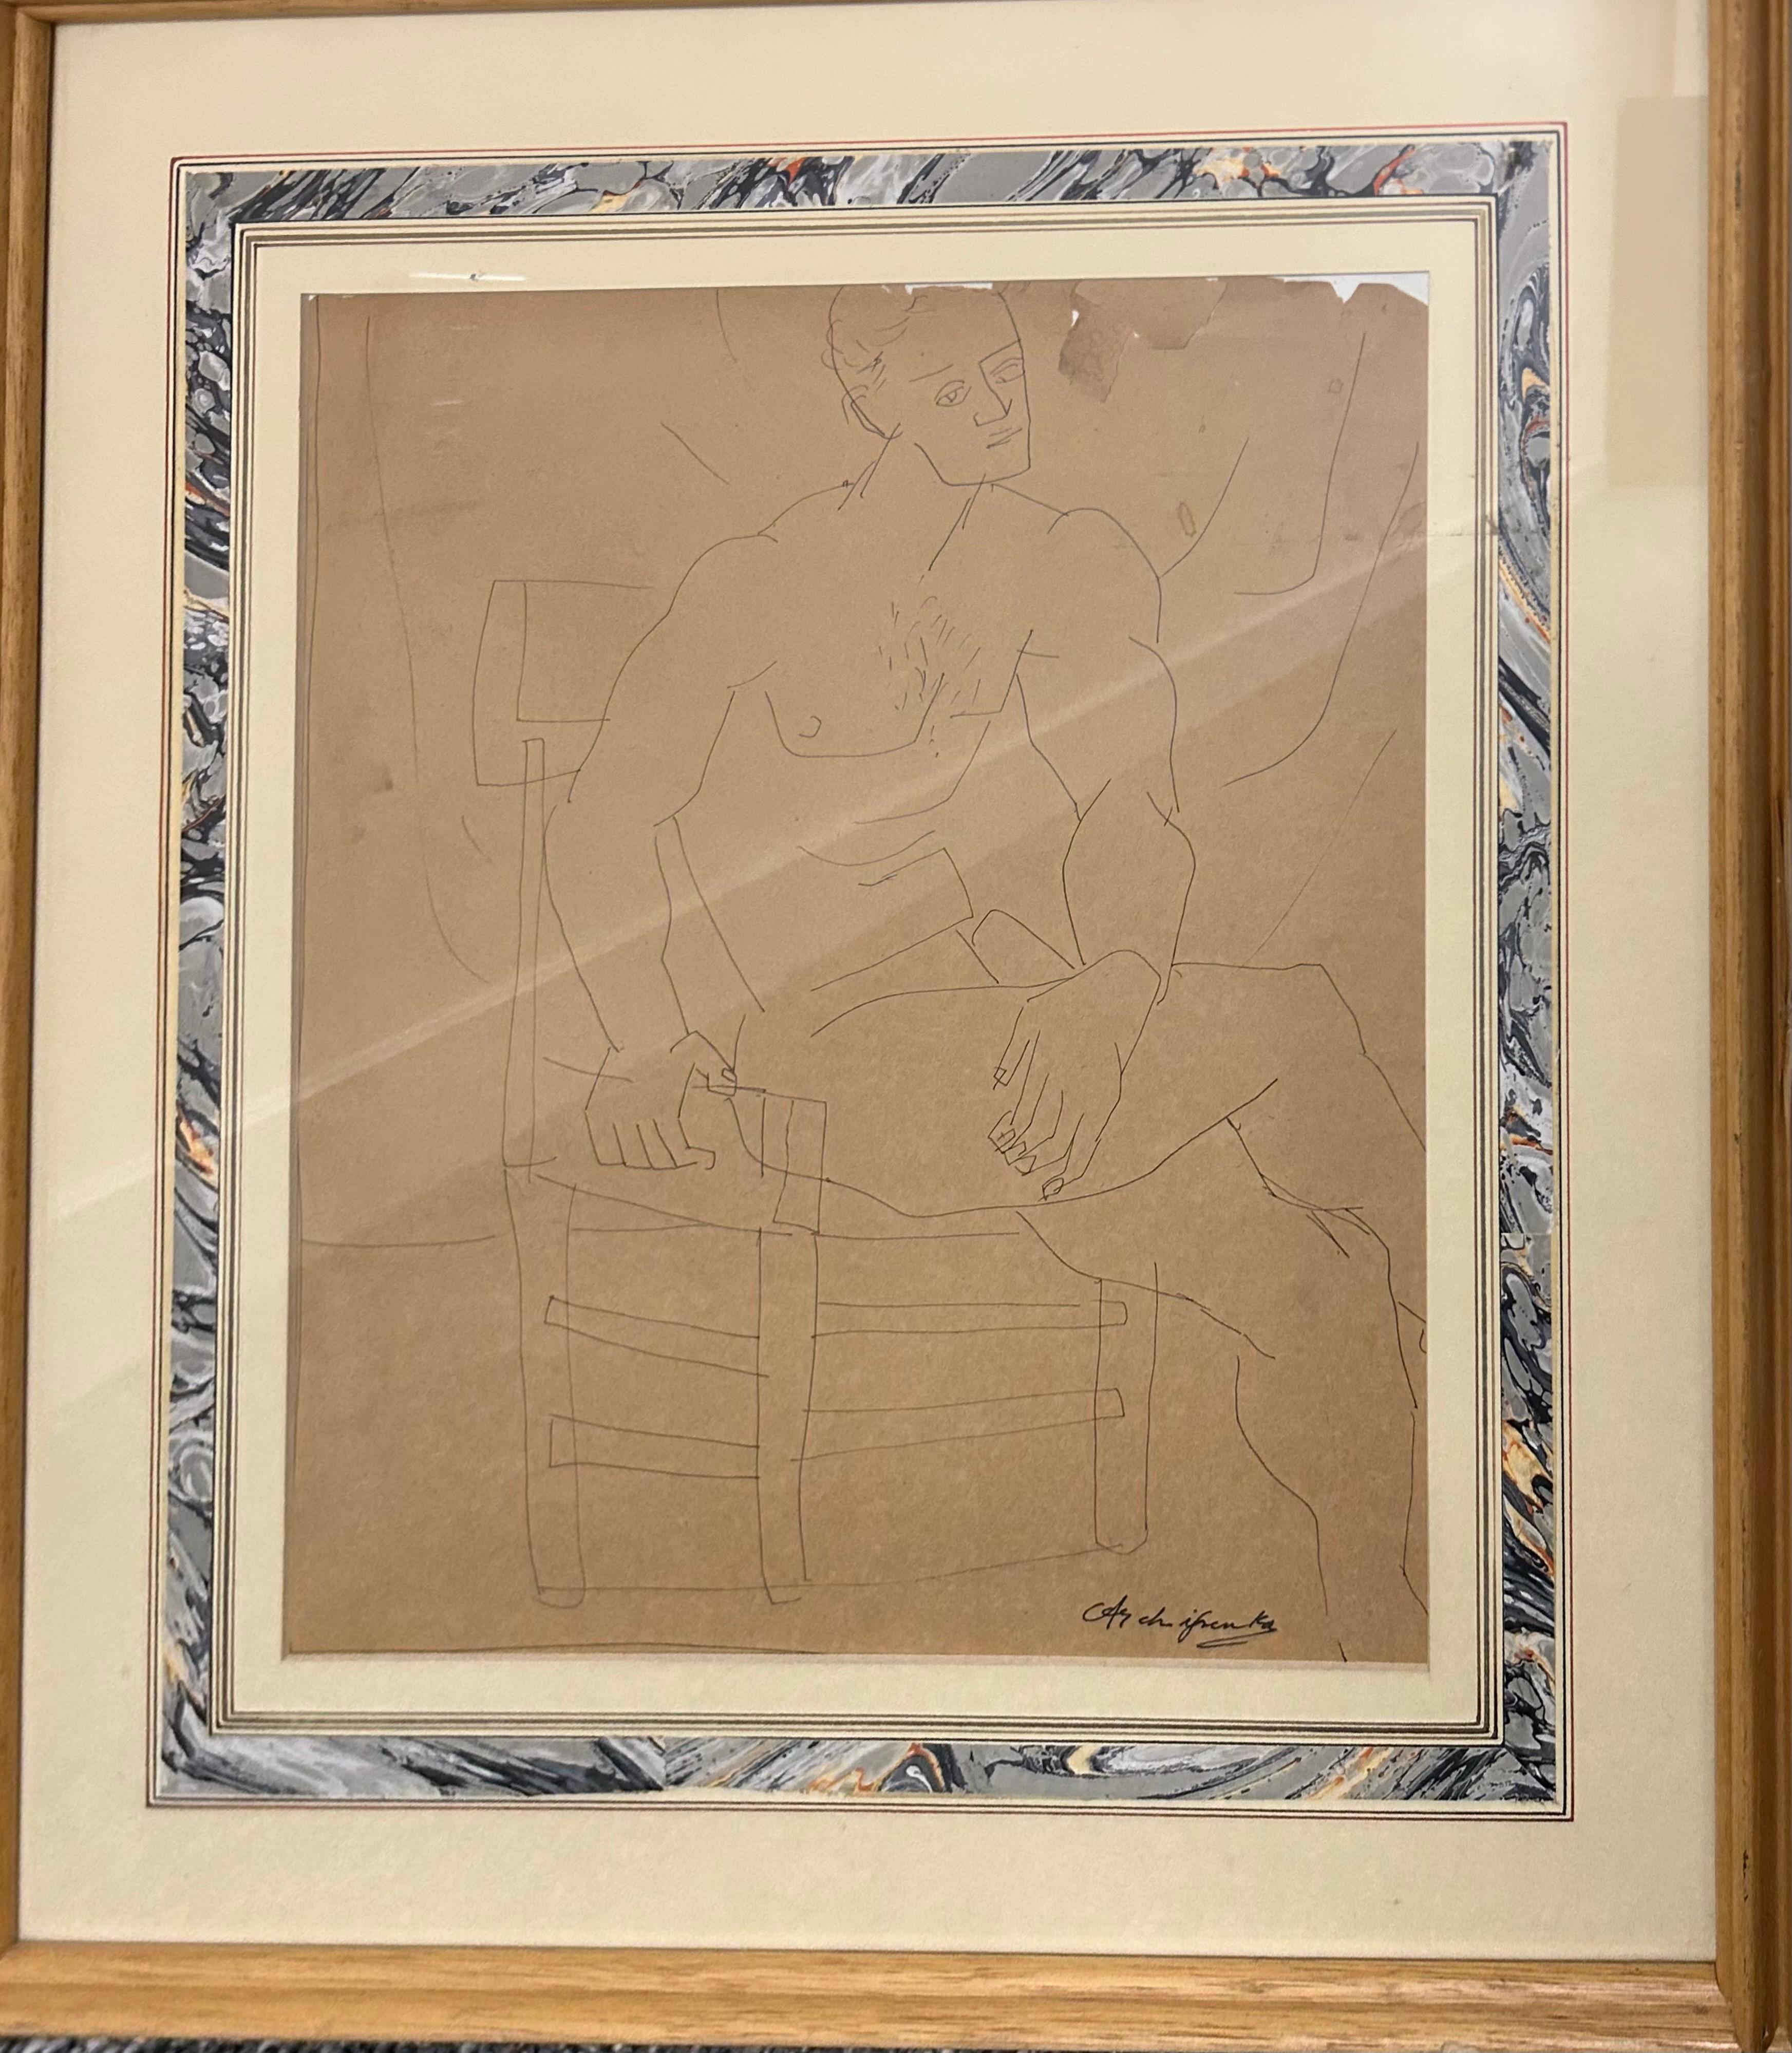 Alexander Archipenko is known for his elegant figurative works. A pair of drawings of a man and woman have the strong, beautiful lines Archipenko mastered.

Graphite on brown paper.

Matted and framed.

Female seated figure image size 13 “H x